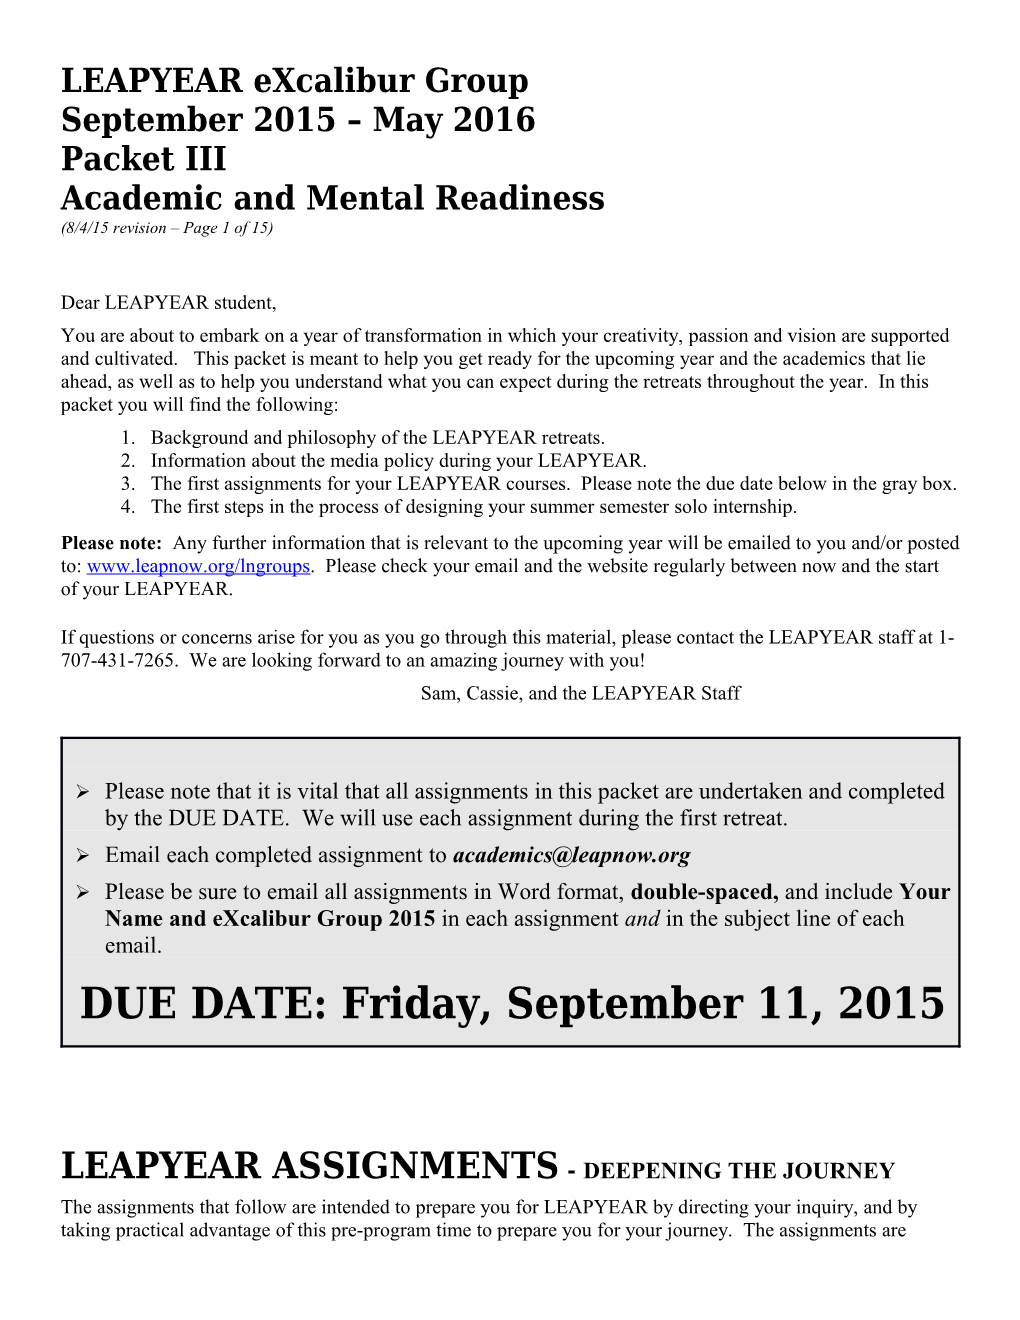 Academic and Mental Readiness